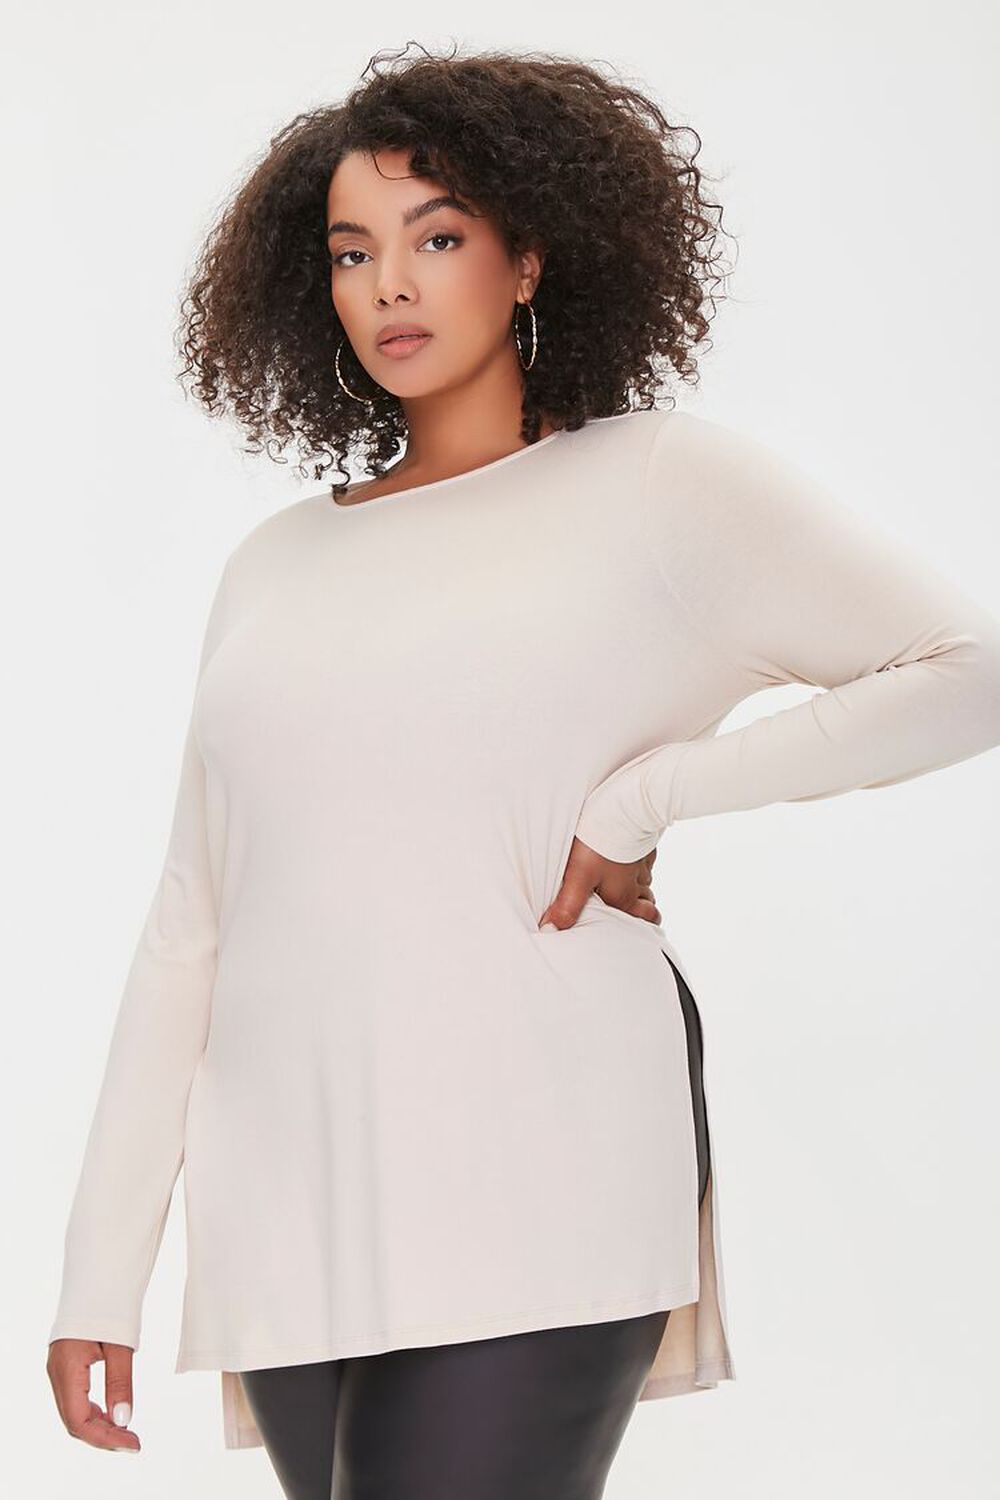 CREAM Plus Size High-Low Top, image 1